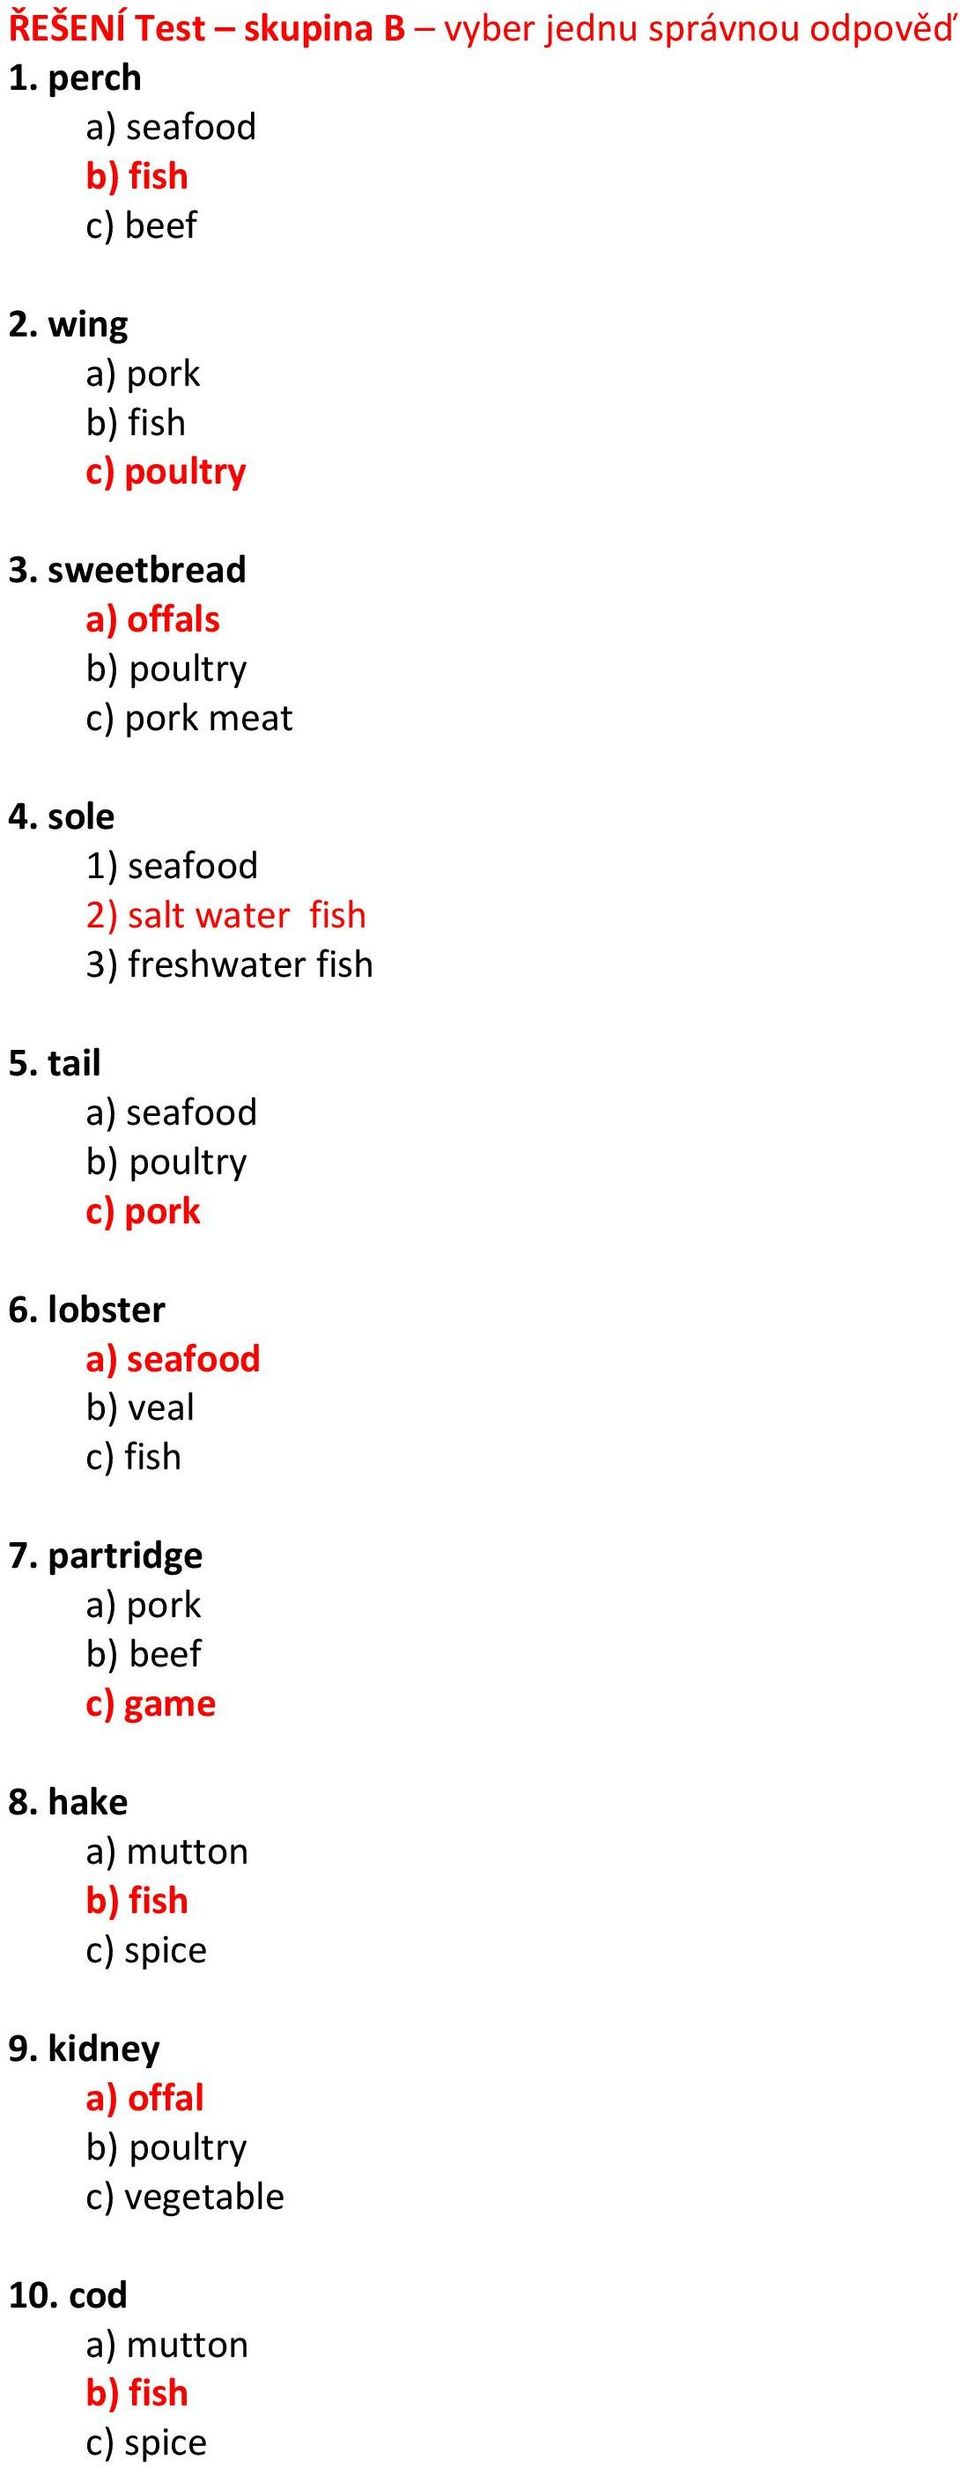 sole 1) seafood 2) salt water fish 3) freshwater